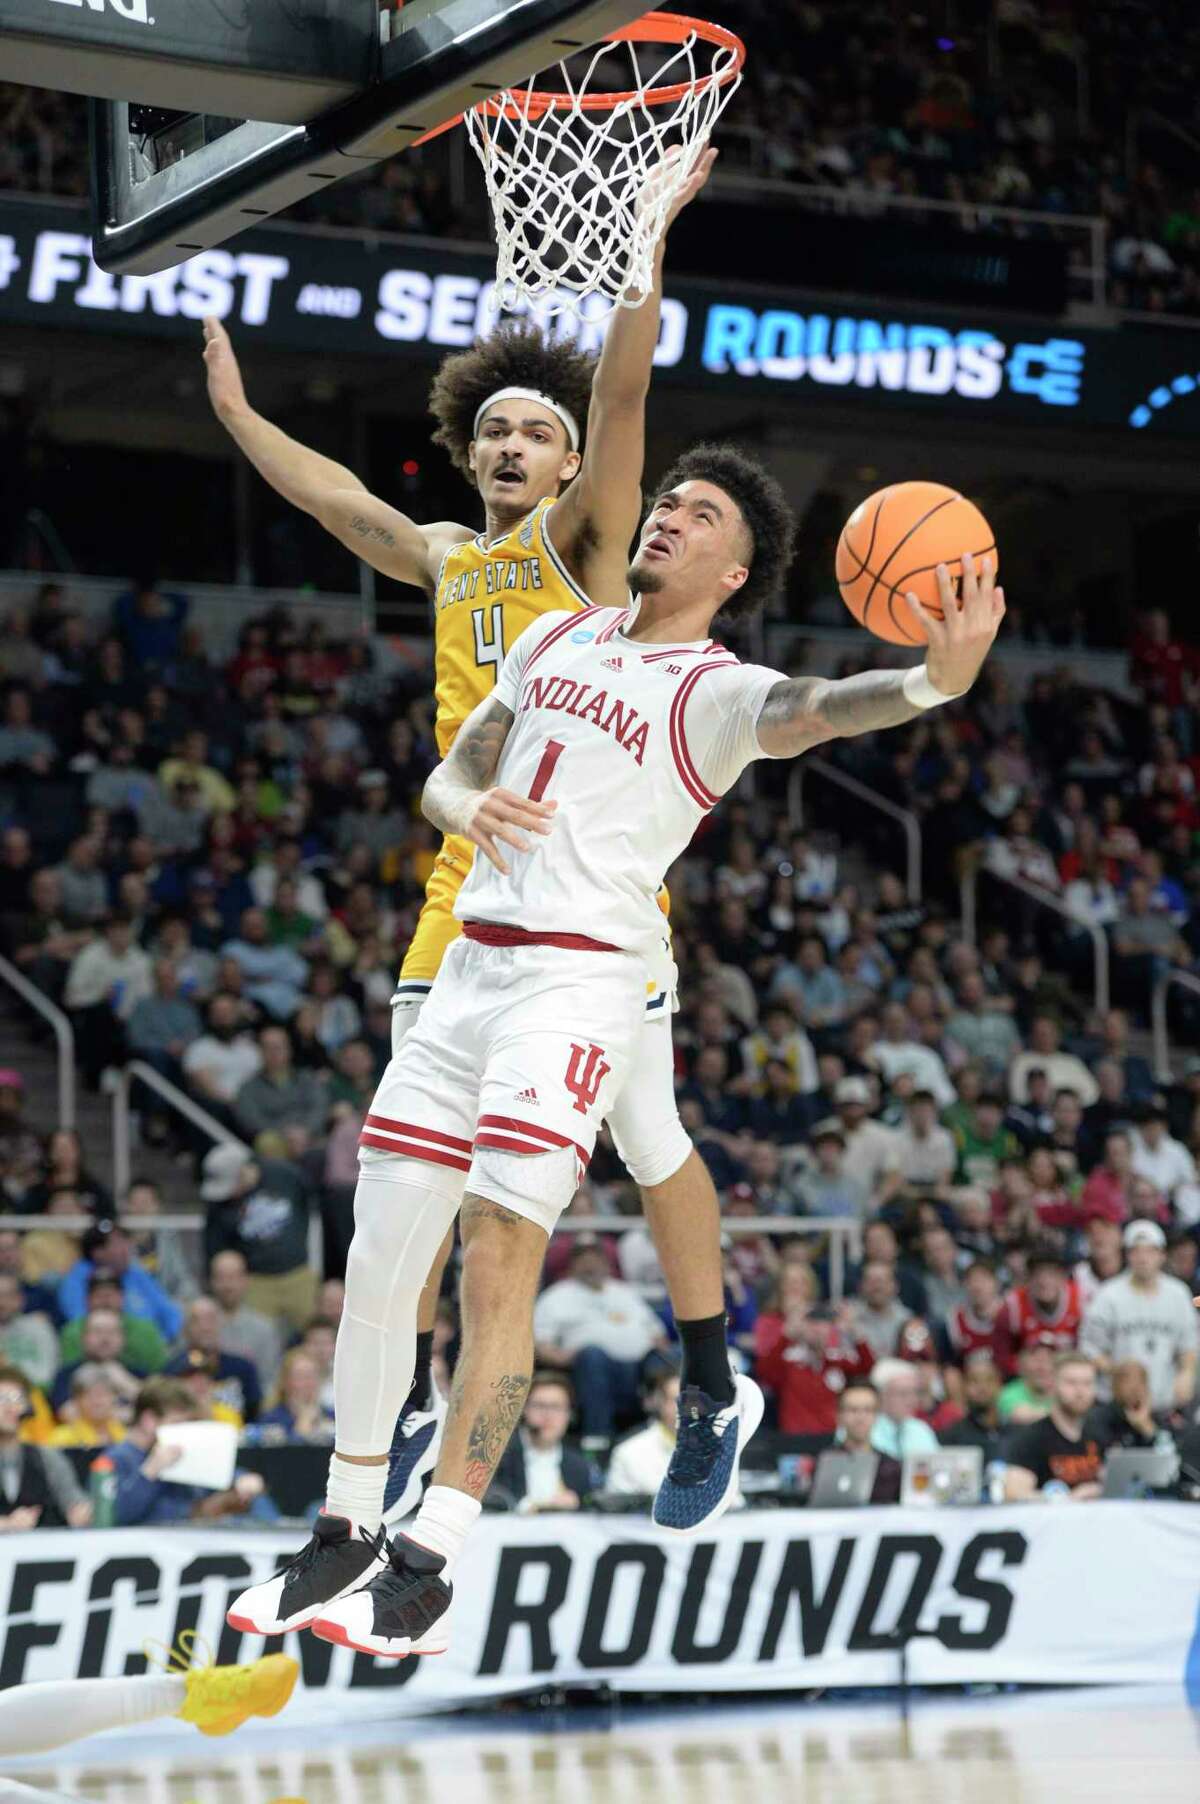 Kent State’s Chris Payton defends a shot from Indiana’s Jalen Hood-Schifino during their game in the first round of the NCAA Men’s Basketball tournament at MVP Arena in Albany, N.Y., on Friday, Mar. 17, 2023. (Jenn March, Special to the Times Union)